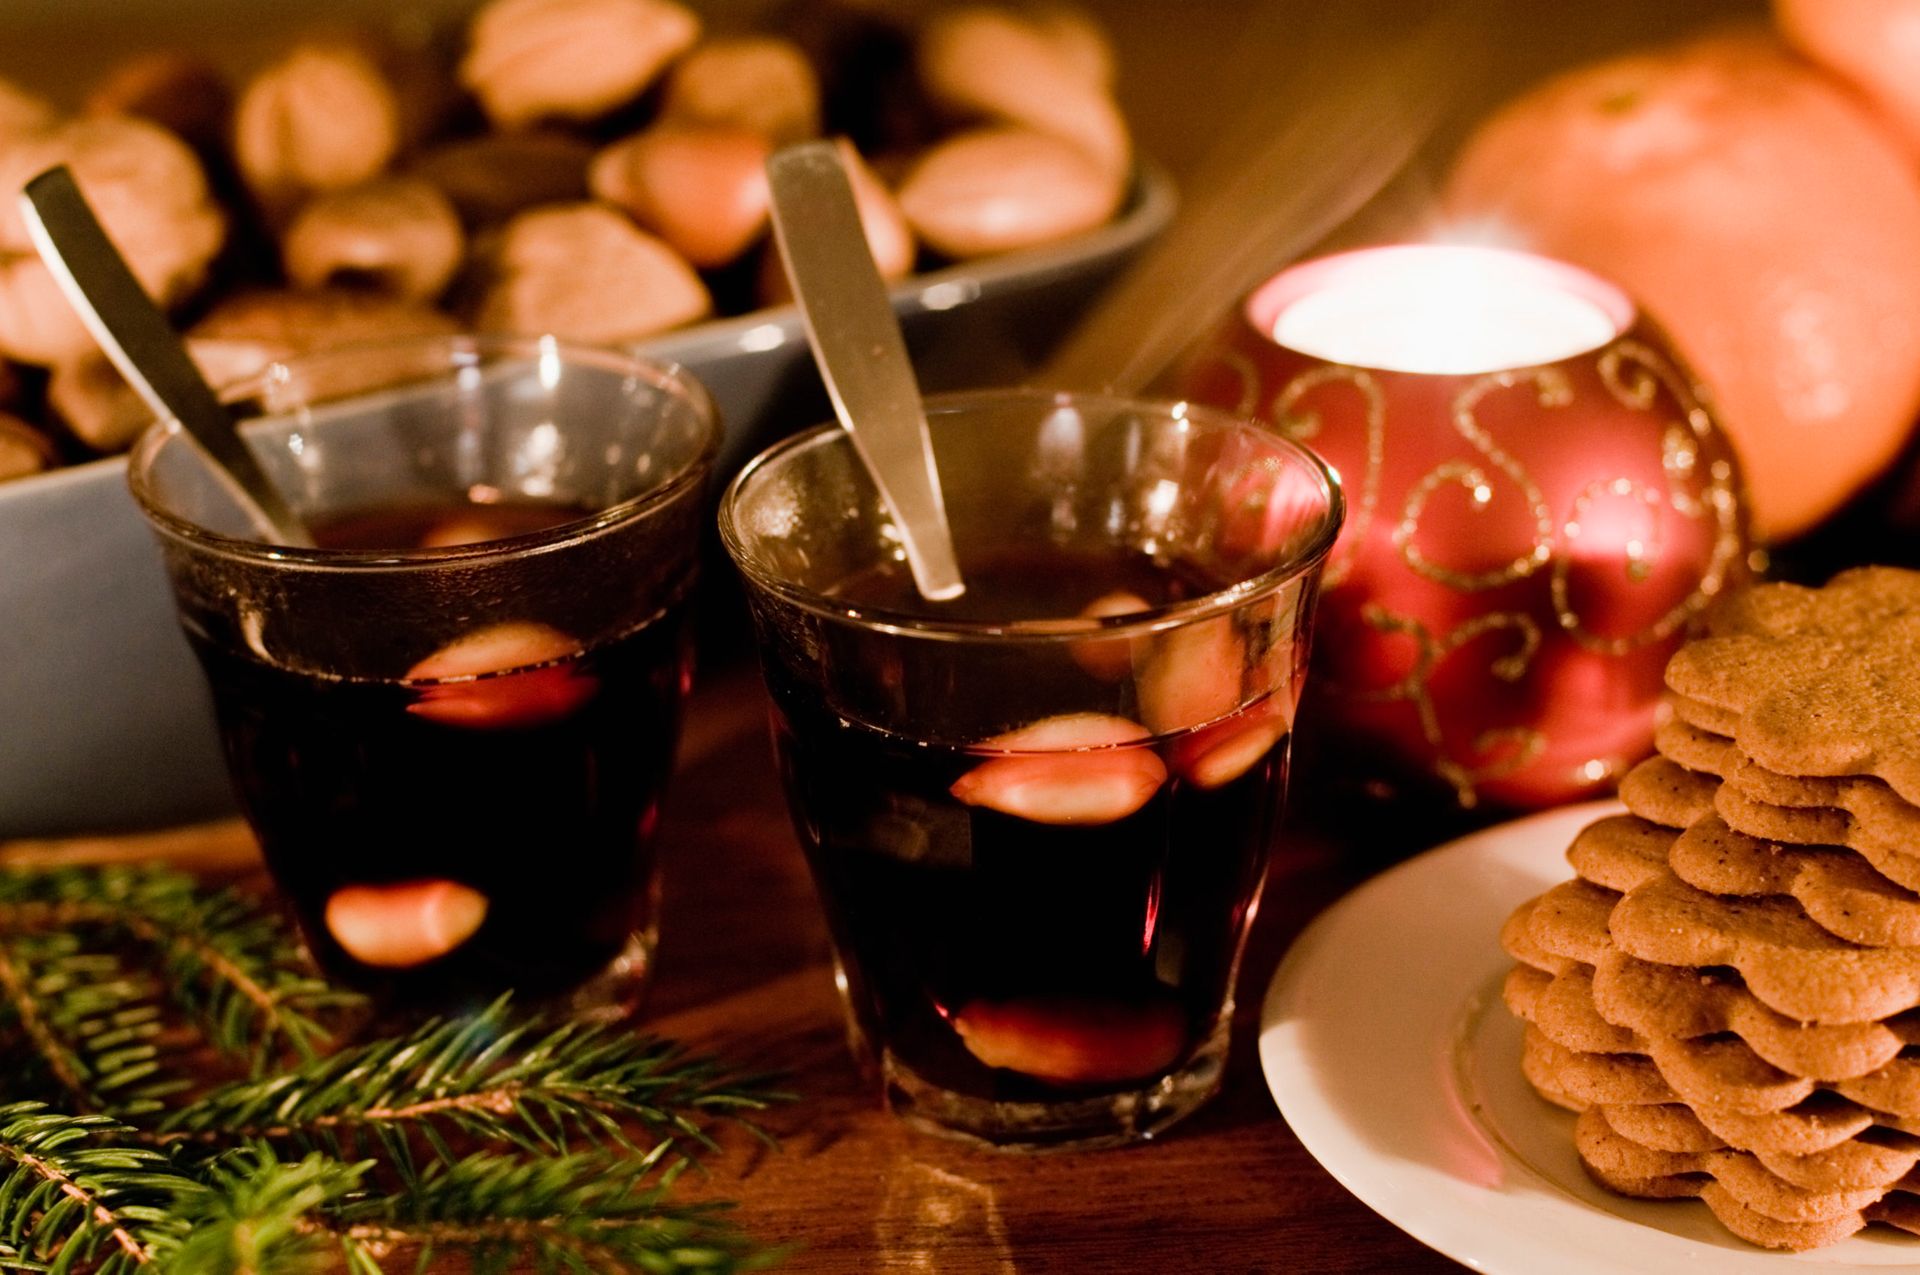 Two small glasses of Swedish mulled wine beside a plate of gingerbred cookies.